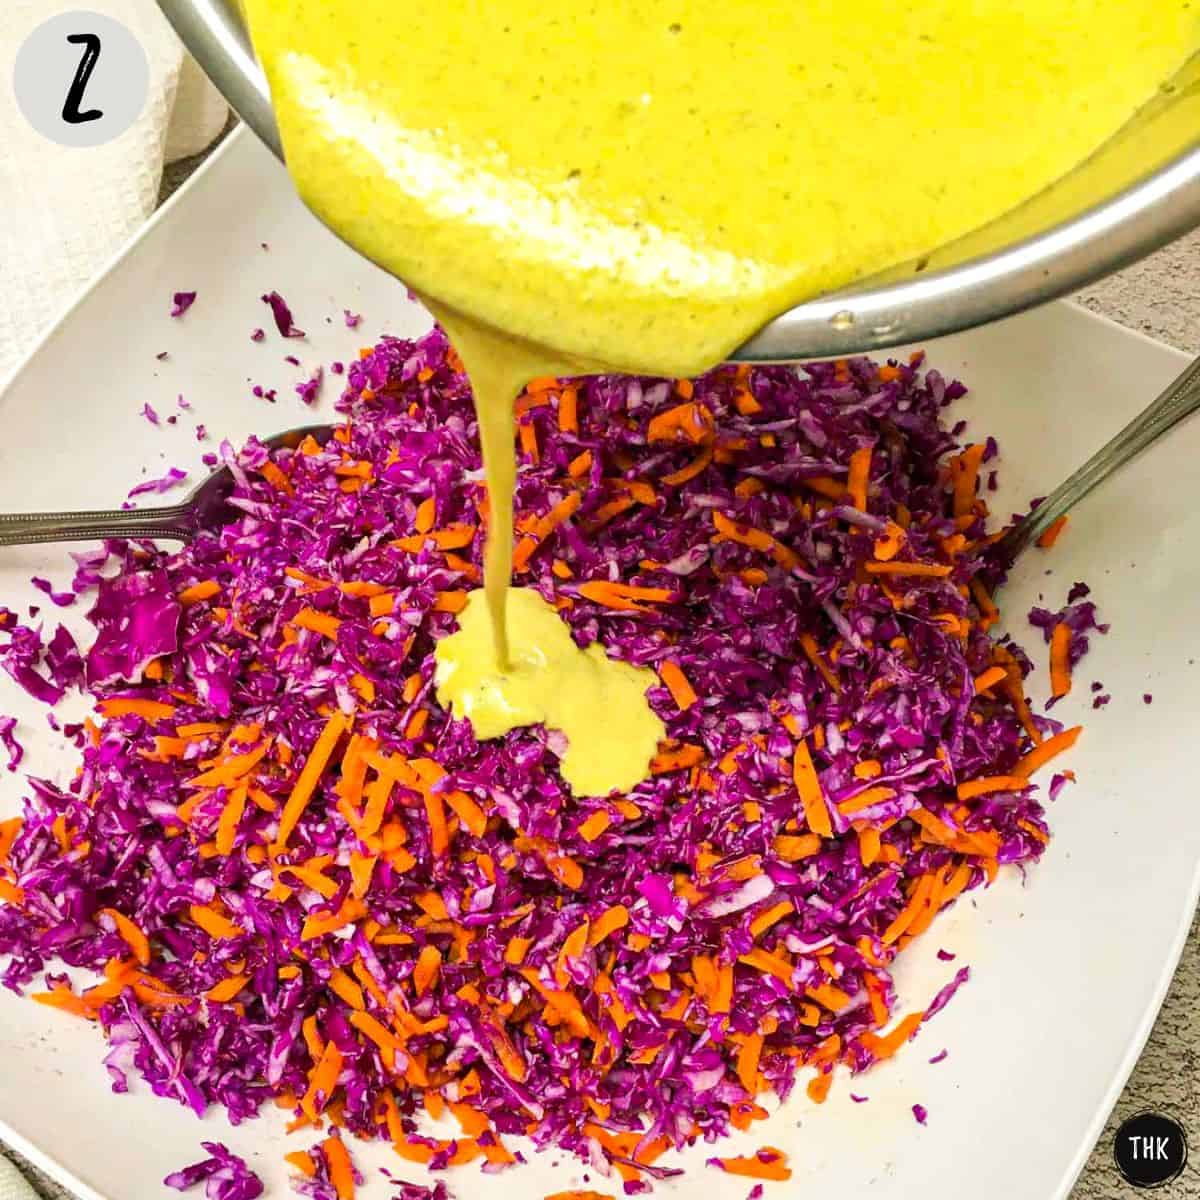 Yellow dressing being poured on top of shredded vegetables.